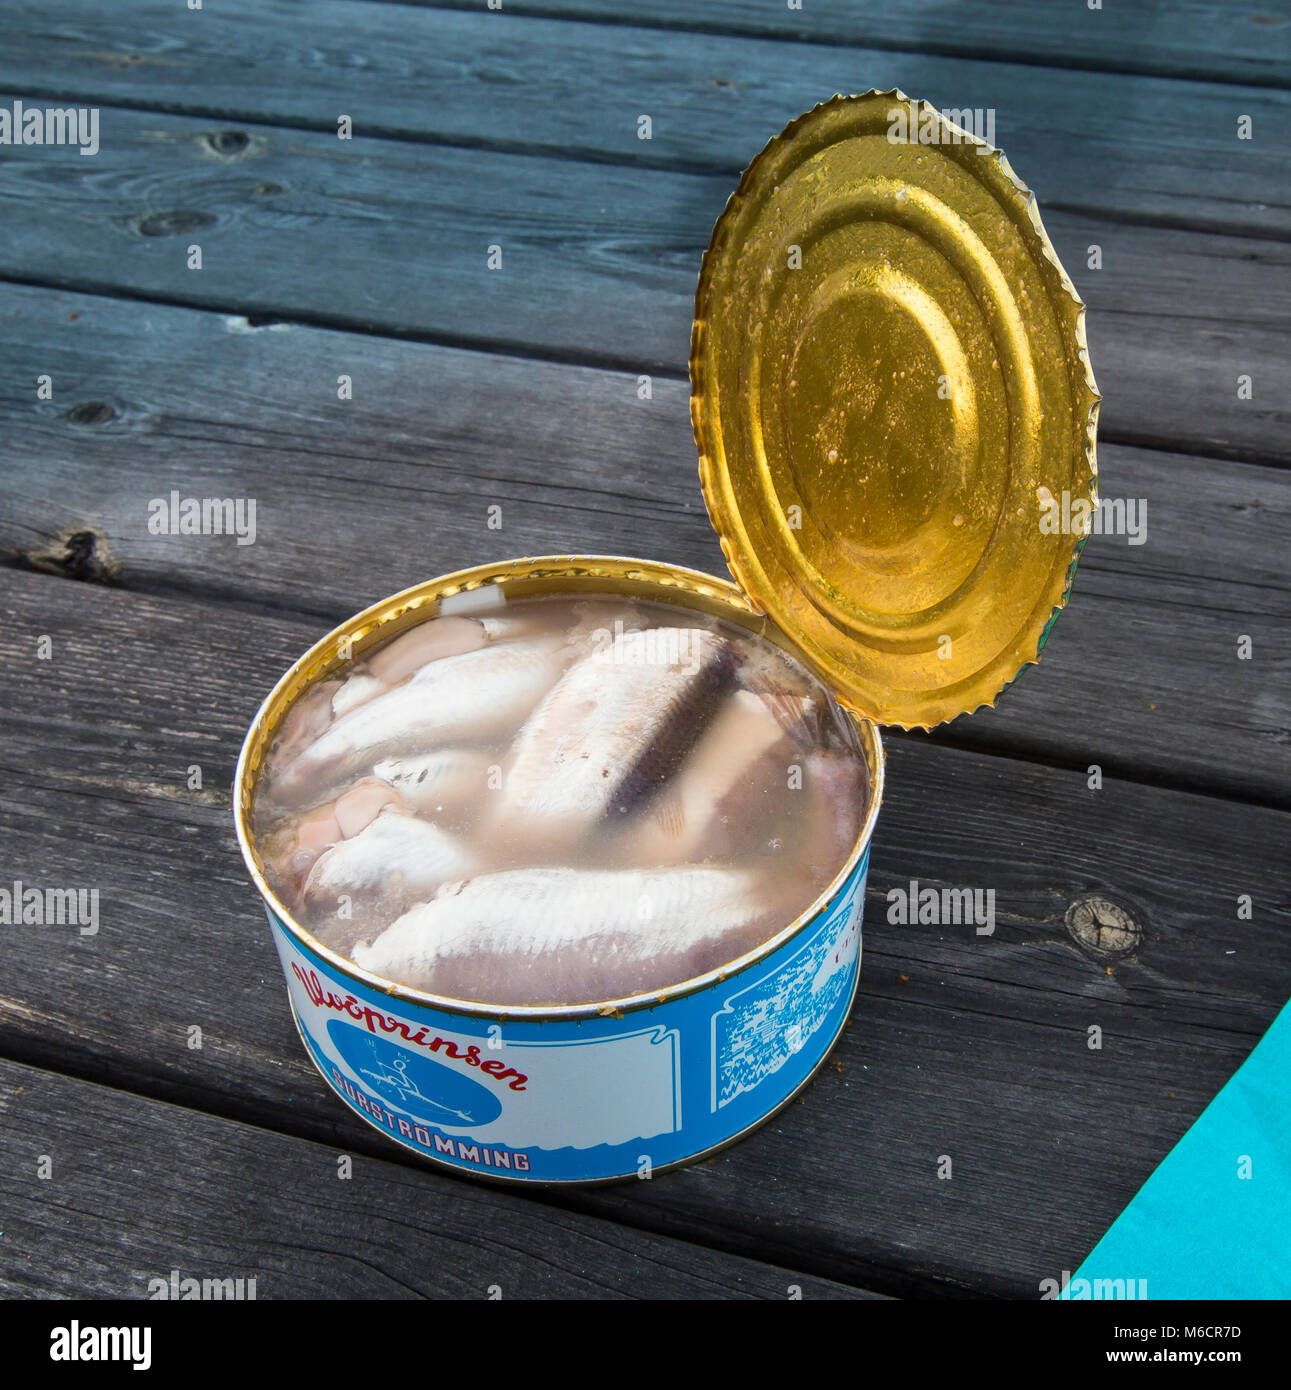 https://c8.alamy.com/comp/M6CR7D/there-are-about-10-fermented-herrings-in-the-can-and-the-smell-is-M6CR7D.jpg